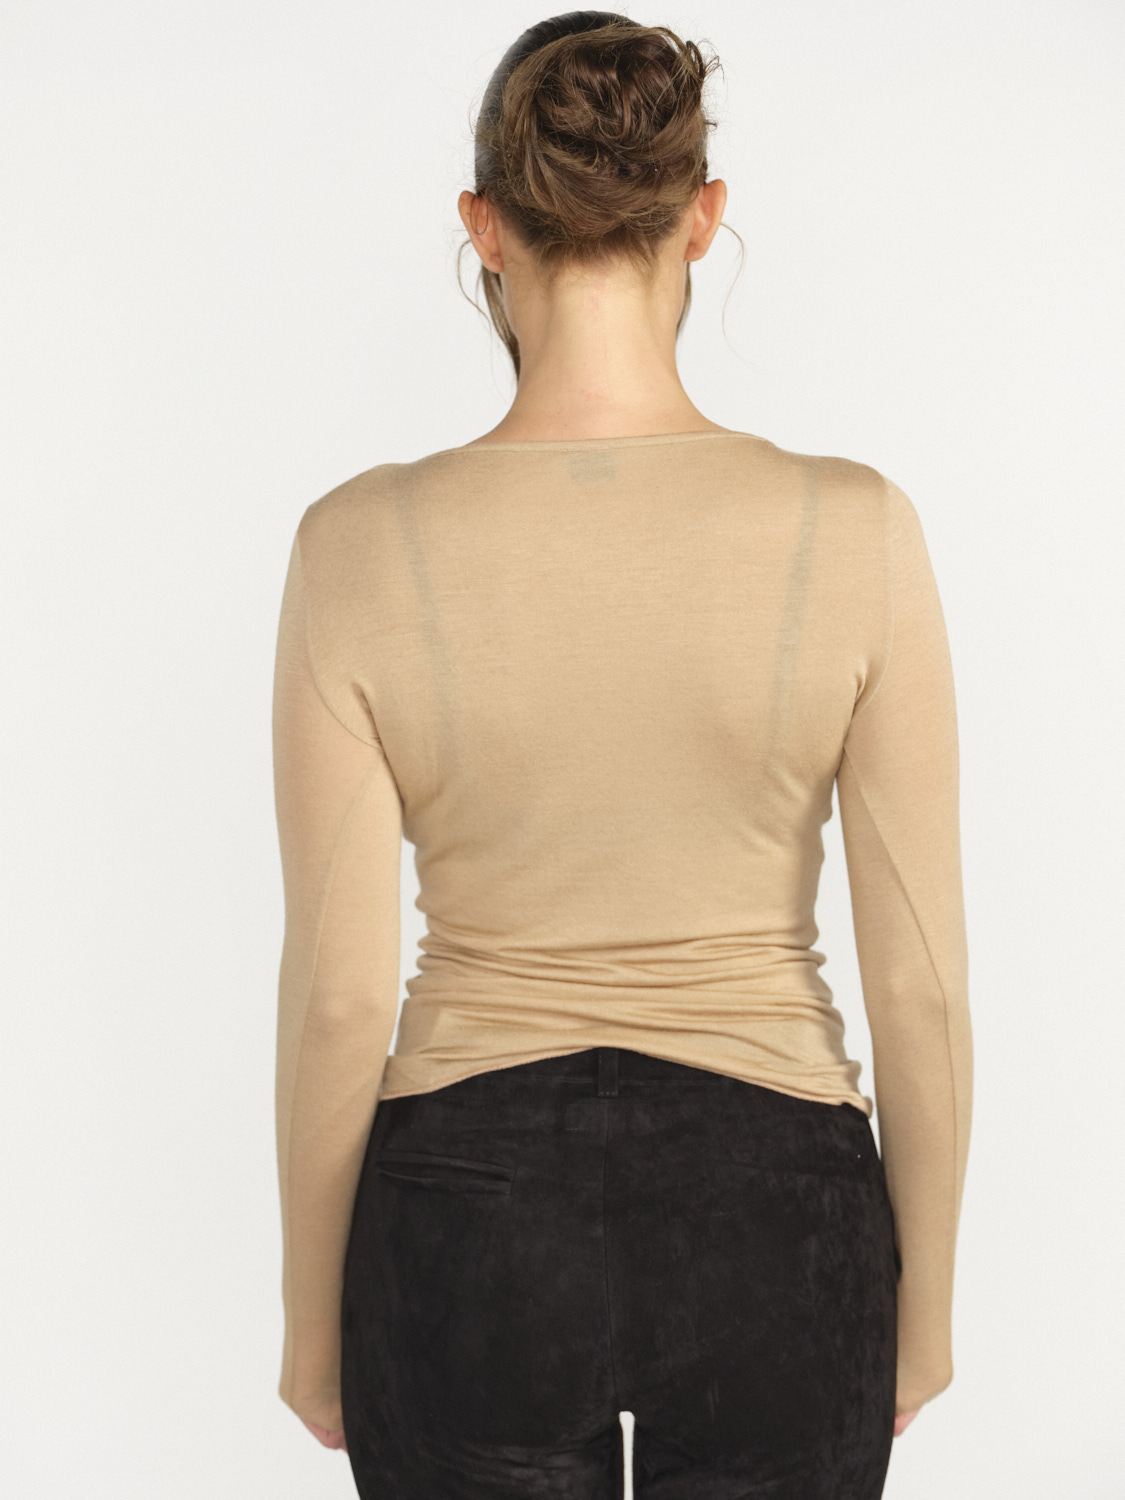 Oscalito Sweater with cashmere portion black M